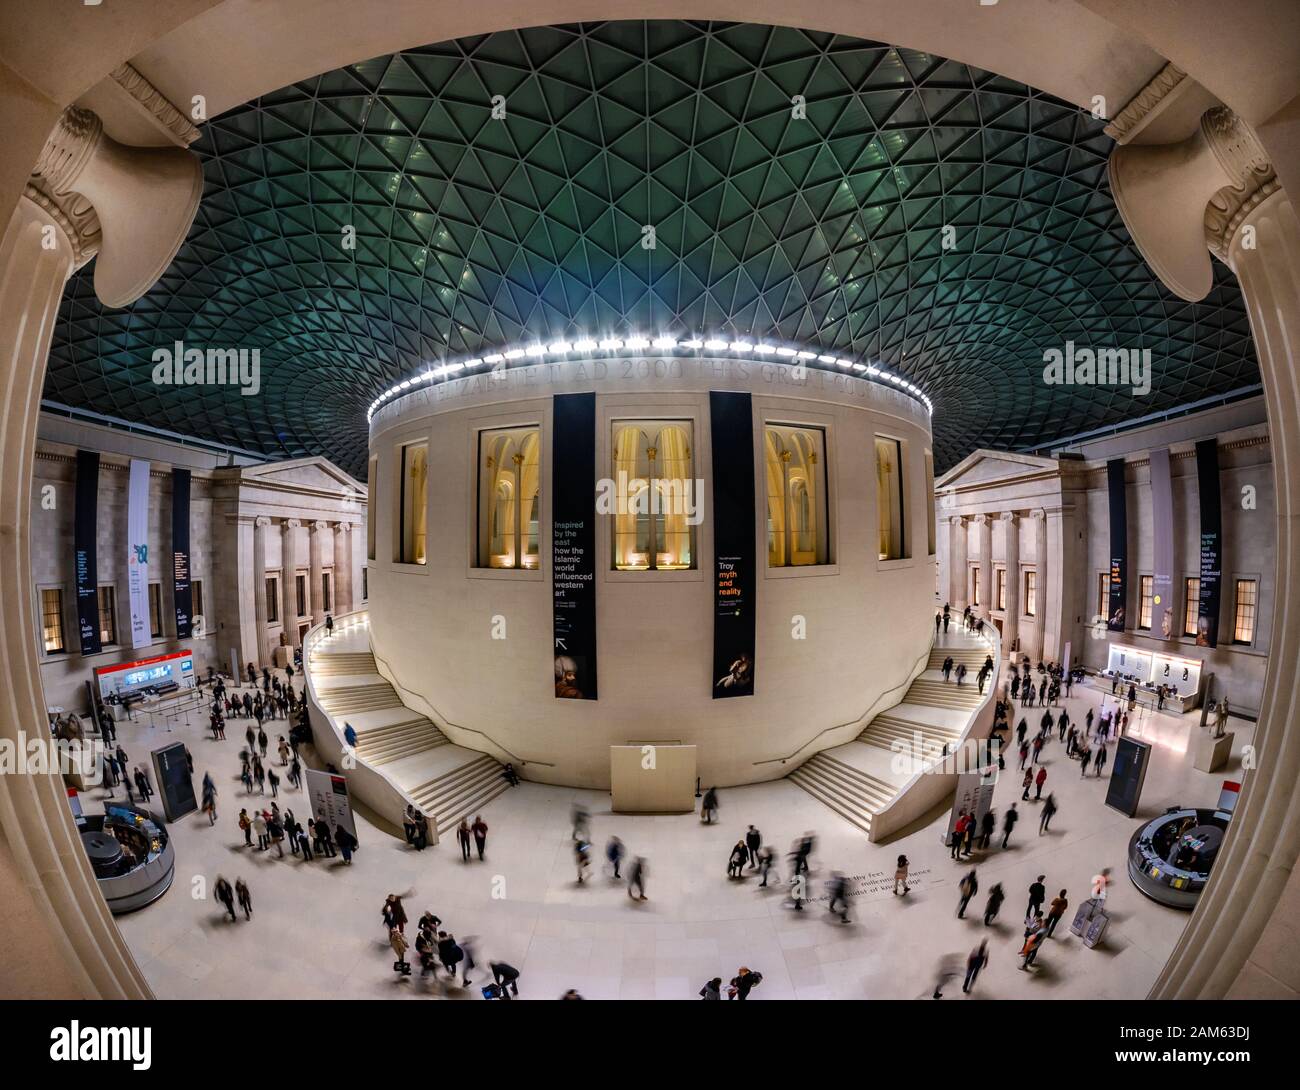 London, England, UK - January 4, 2020: Wide view of the interior architecture and tourists visiting the central square inside British Museum Stock Photo